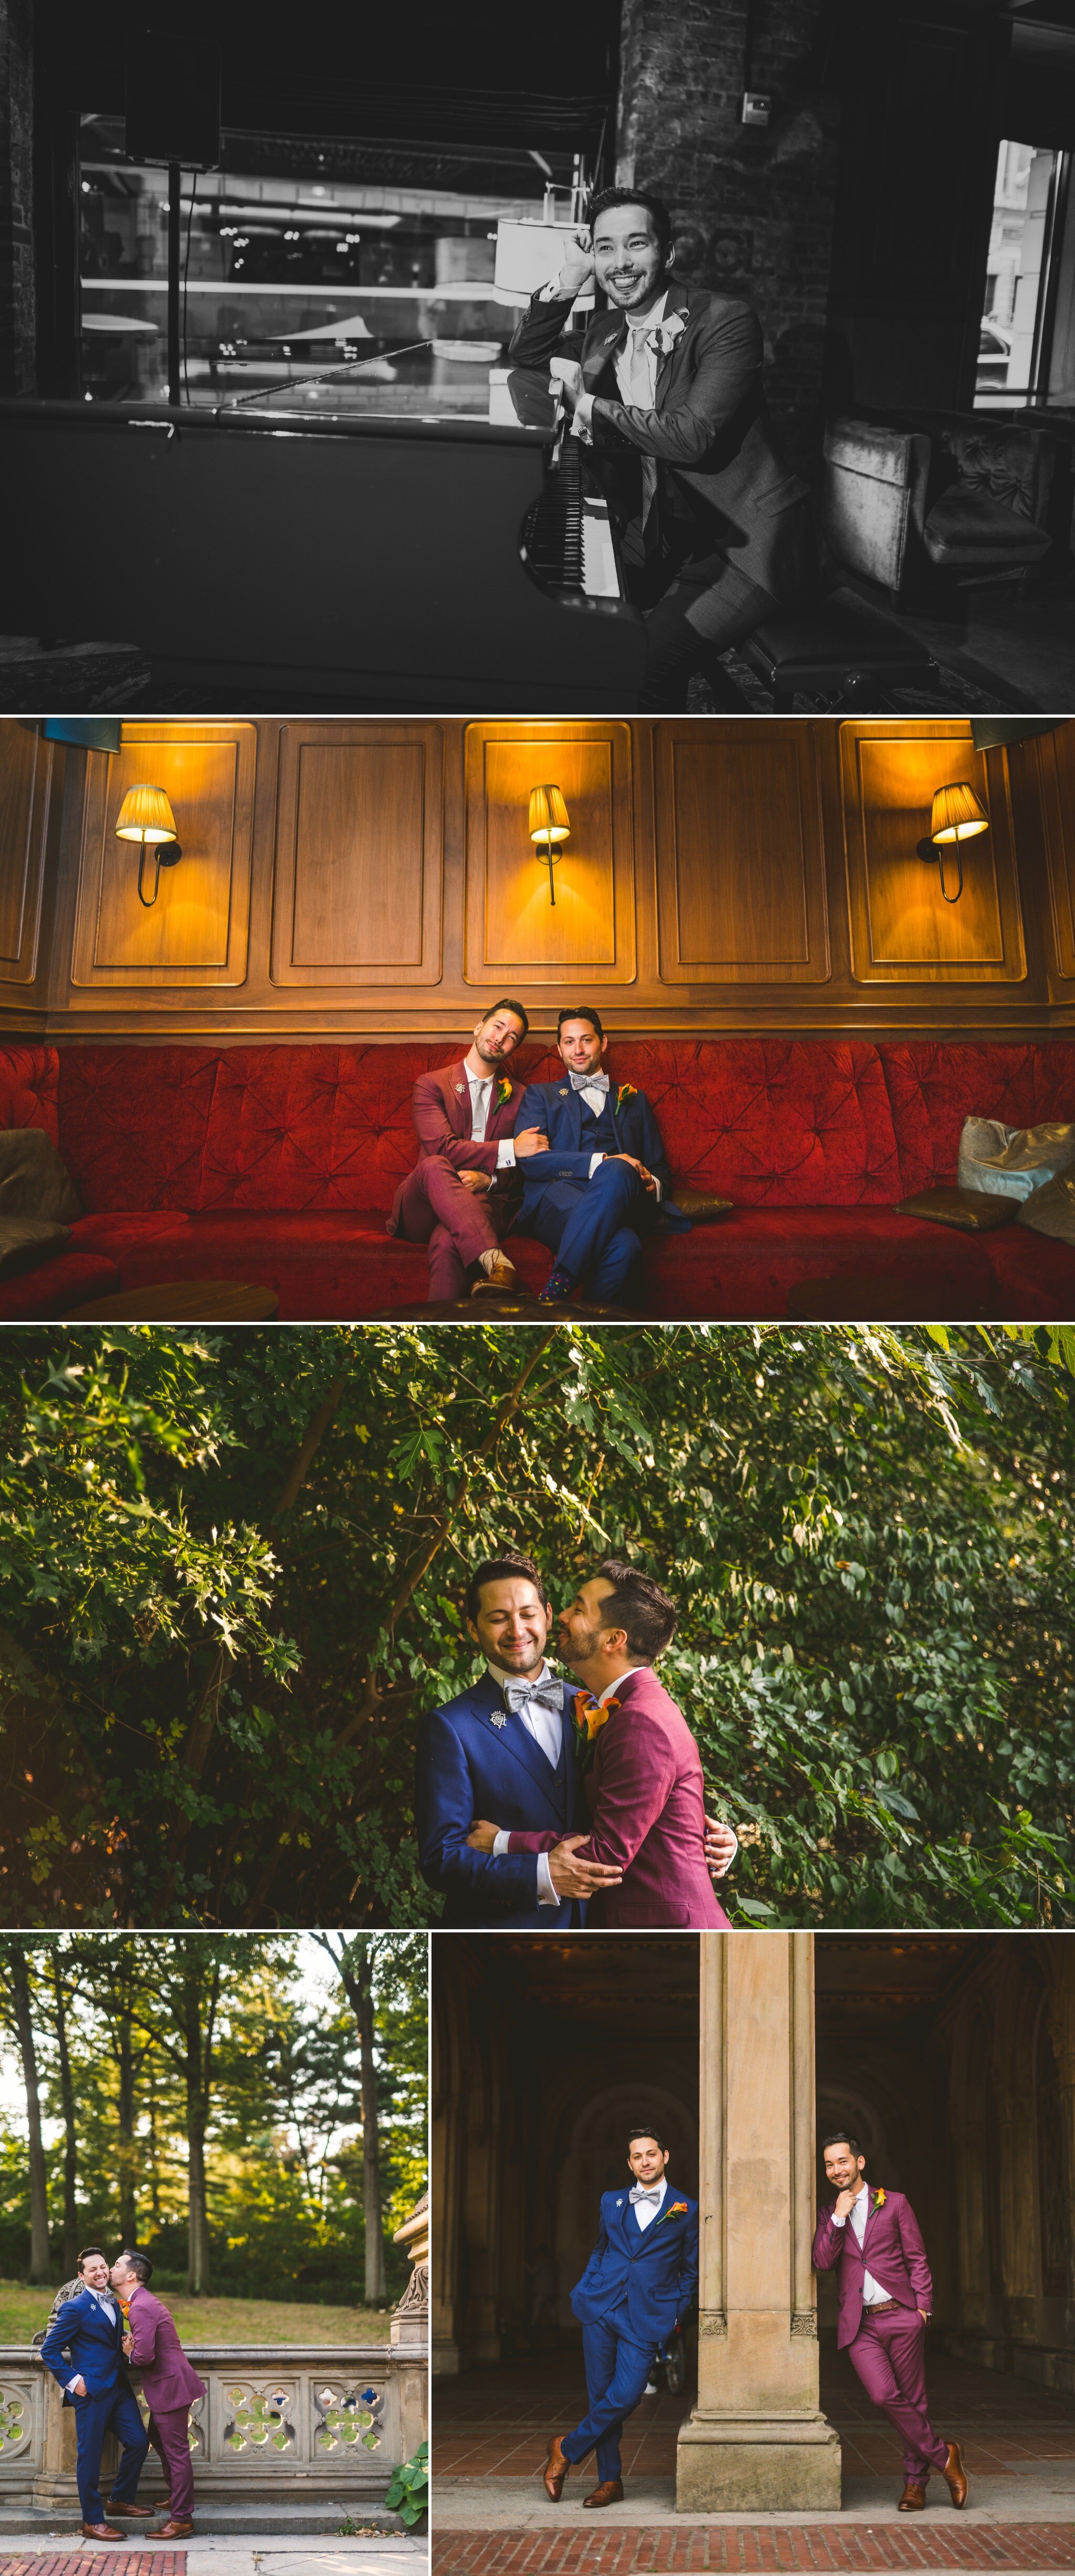  some selected images from their formal portraits.Photographs from Keiji and Michael's Manhattan, New York wedding at the Arthouse Hotel and the Central Park Boathouse. 